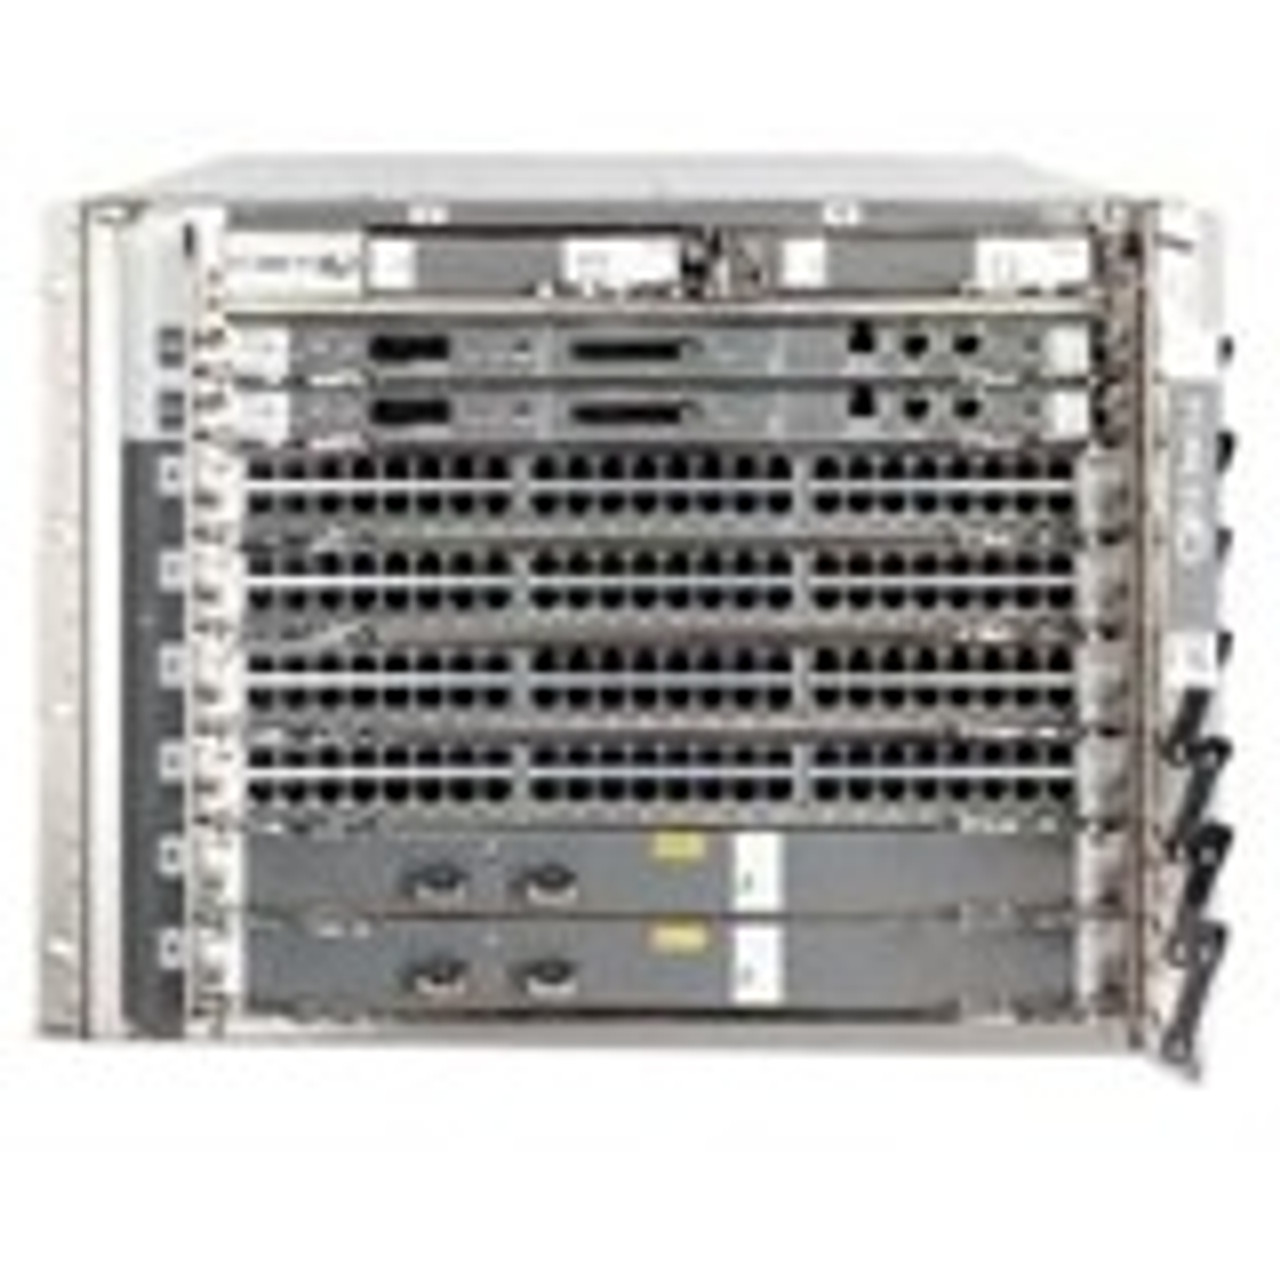 CH-E300-BNA9-L Force10 TeraScale E300 Switch Chassis with backplane